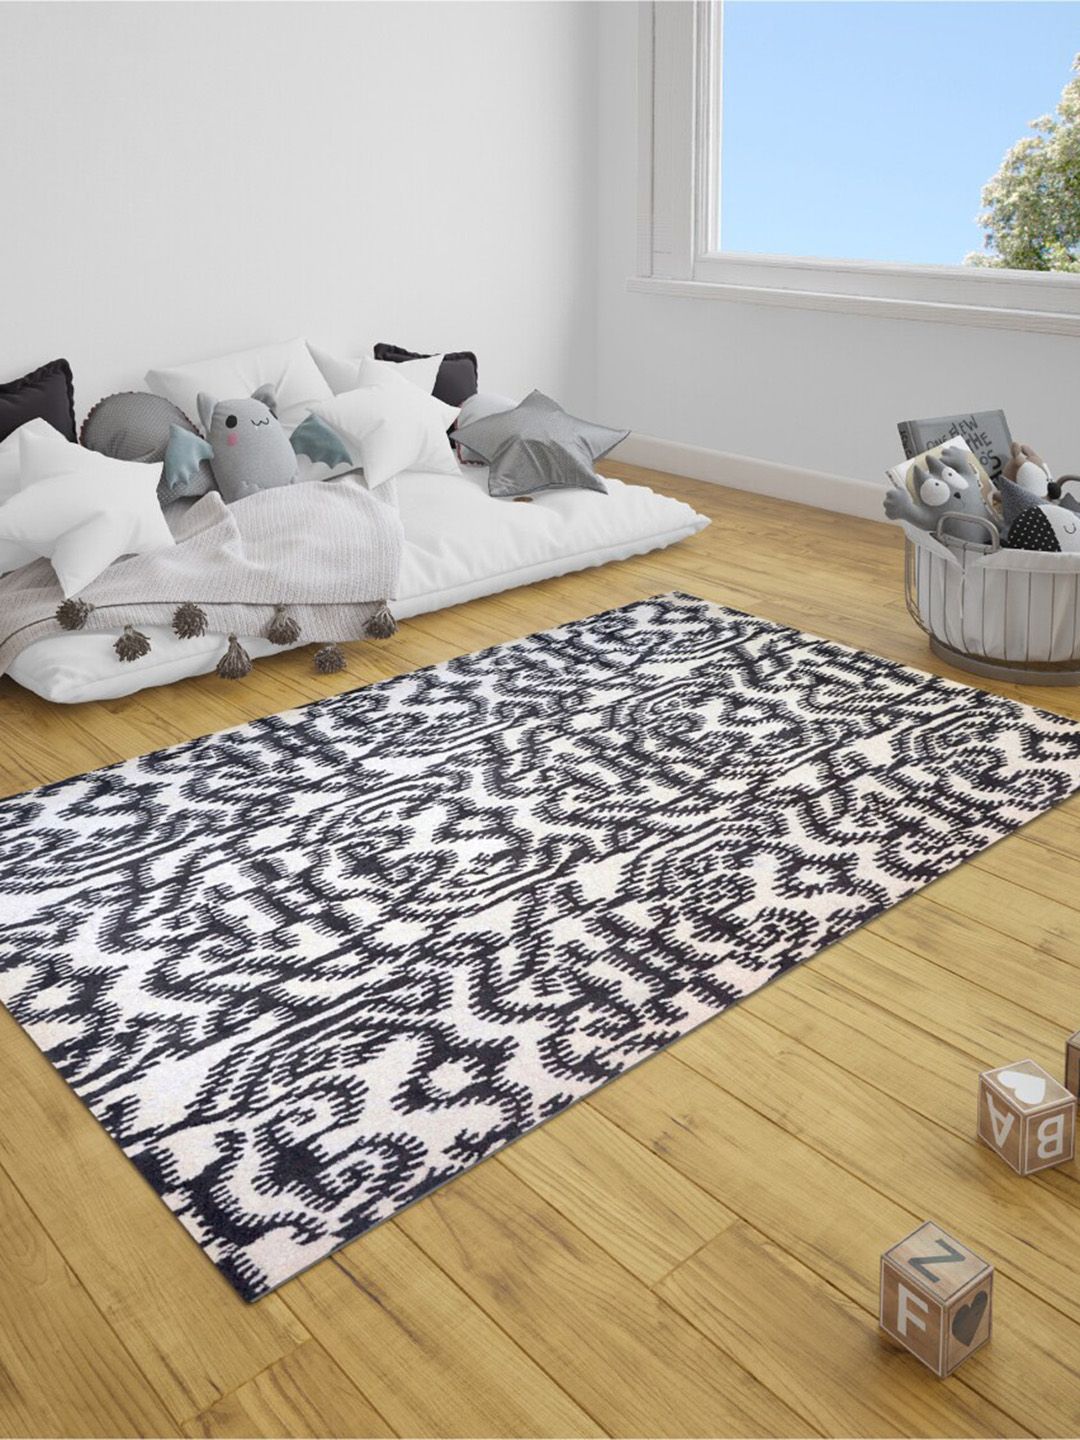 SANDED EDGE Black & White Abstract Printed Rectangular Wool Carpets Price in India